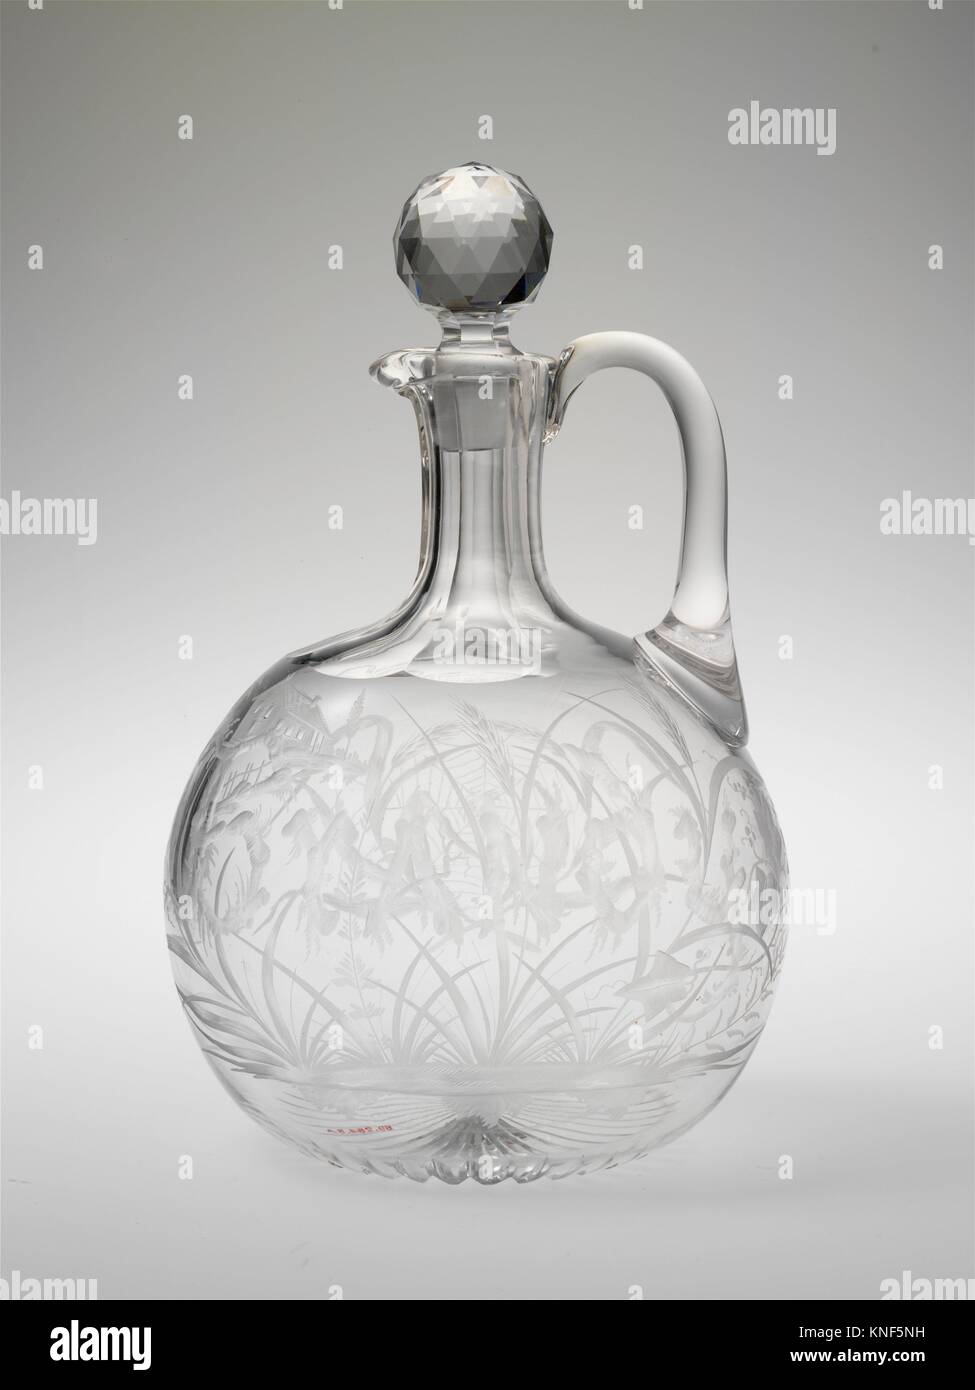 Decanter. Decorator: Possibly engraved by Henry Leighton; Manufacturer: New England Glass Company (American, East Cambridge, Massachusetts, Stock Photo